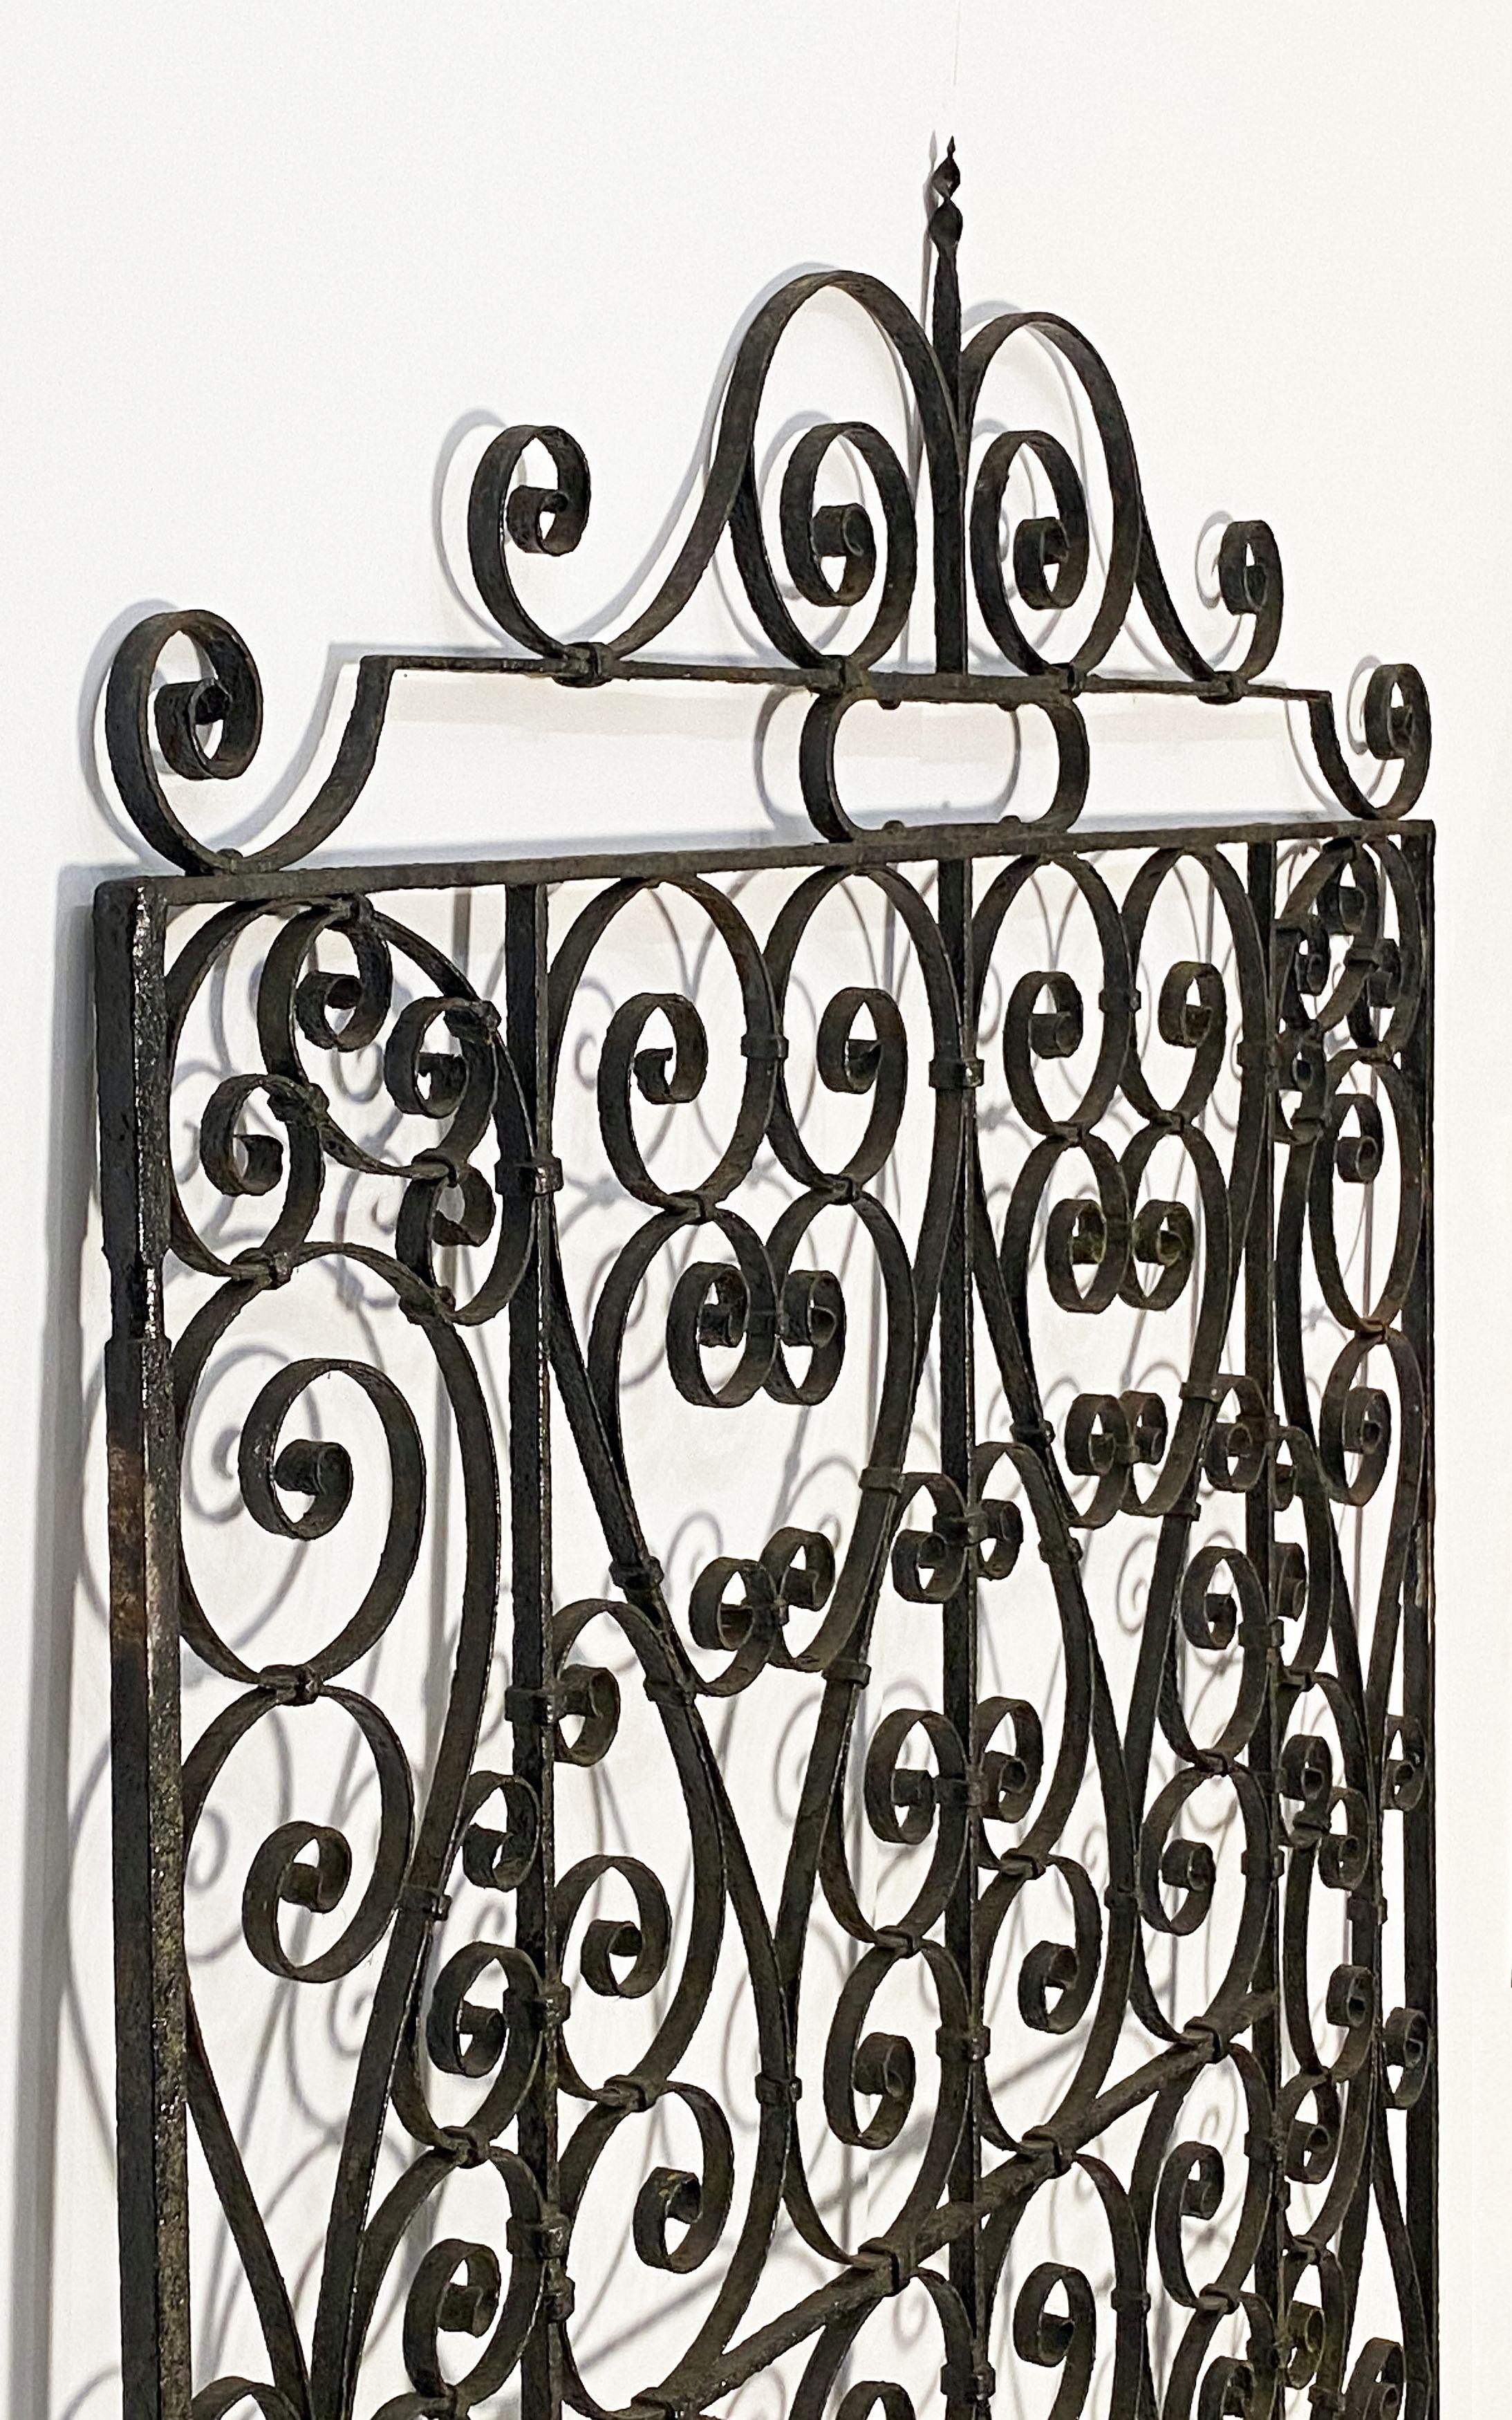 A handsome large French gate of wrought iron from the 19th century, featuring a Fine design of scroll work and decorative embellishments.

Perfect for a garden room or conservatory or for use as a trellis or architectural feature.